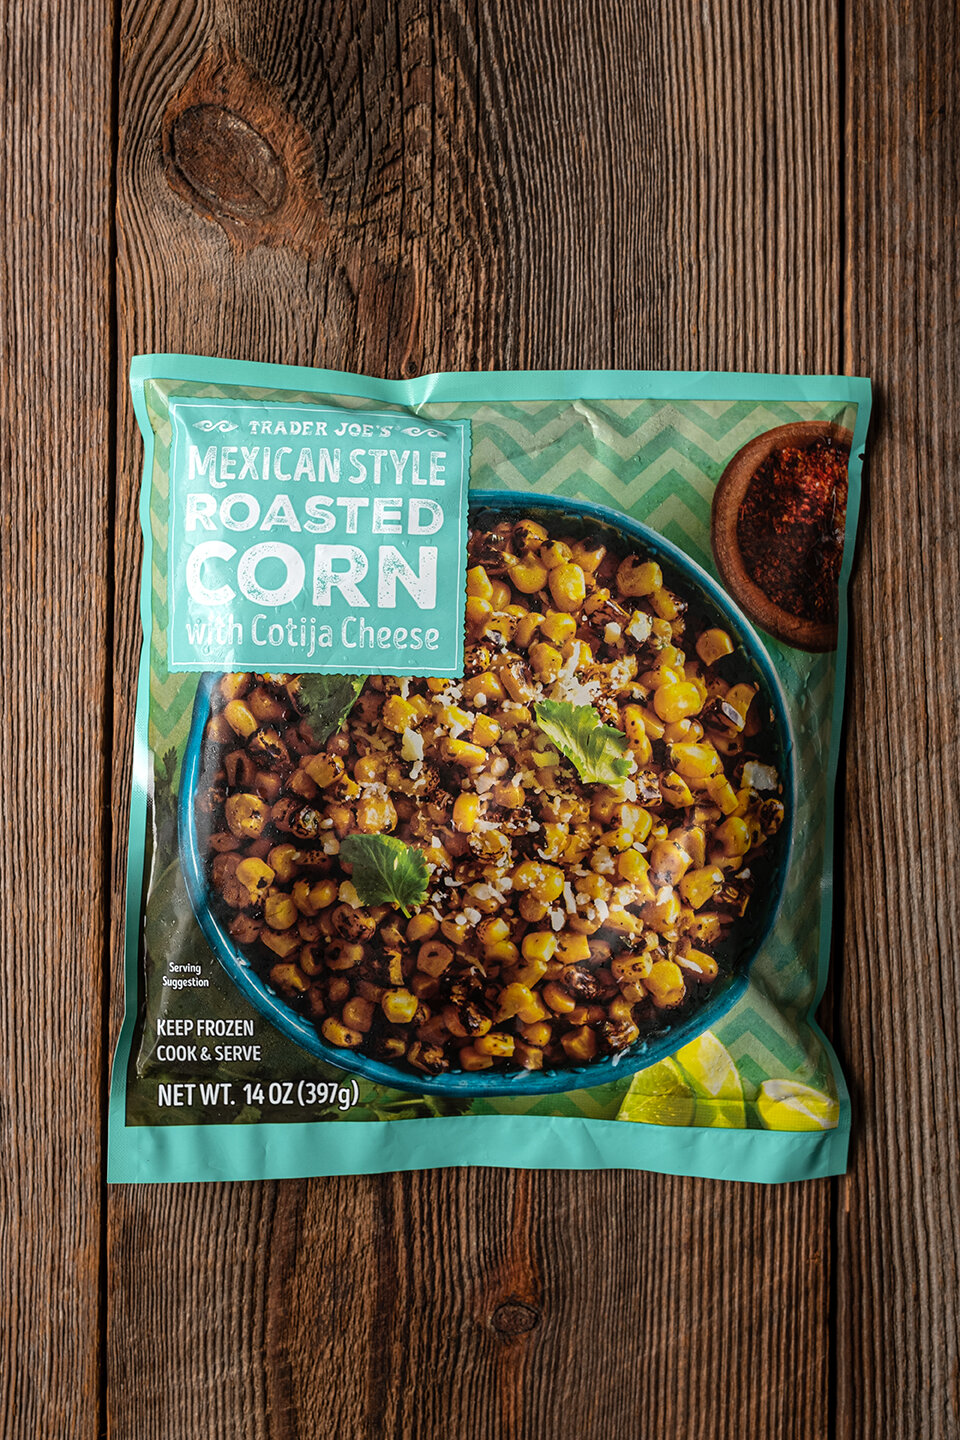 Mexican Style Roasted Corn $3.29